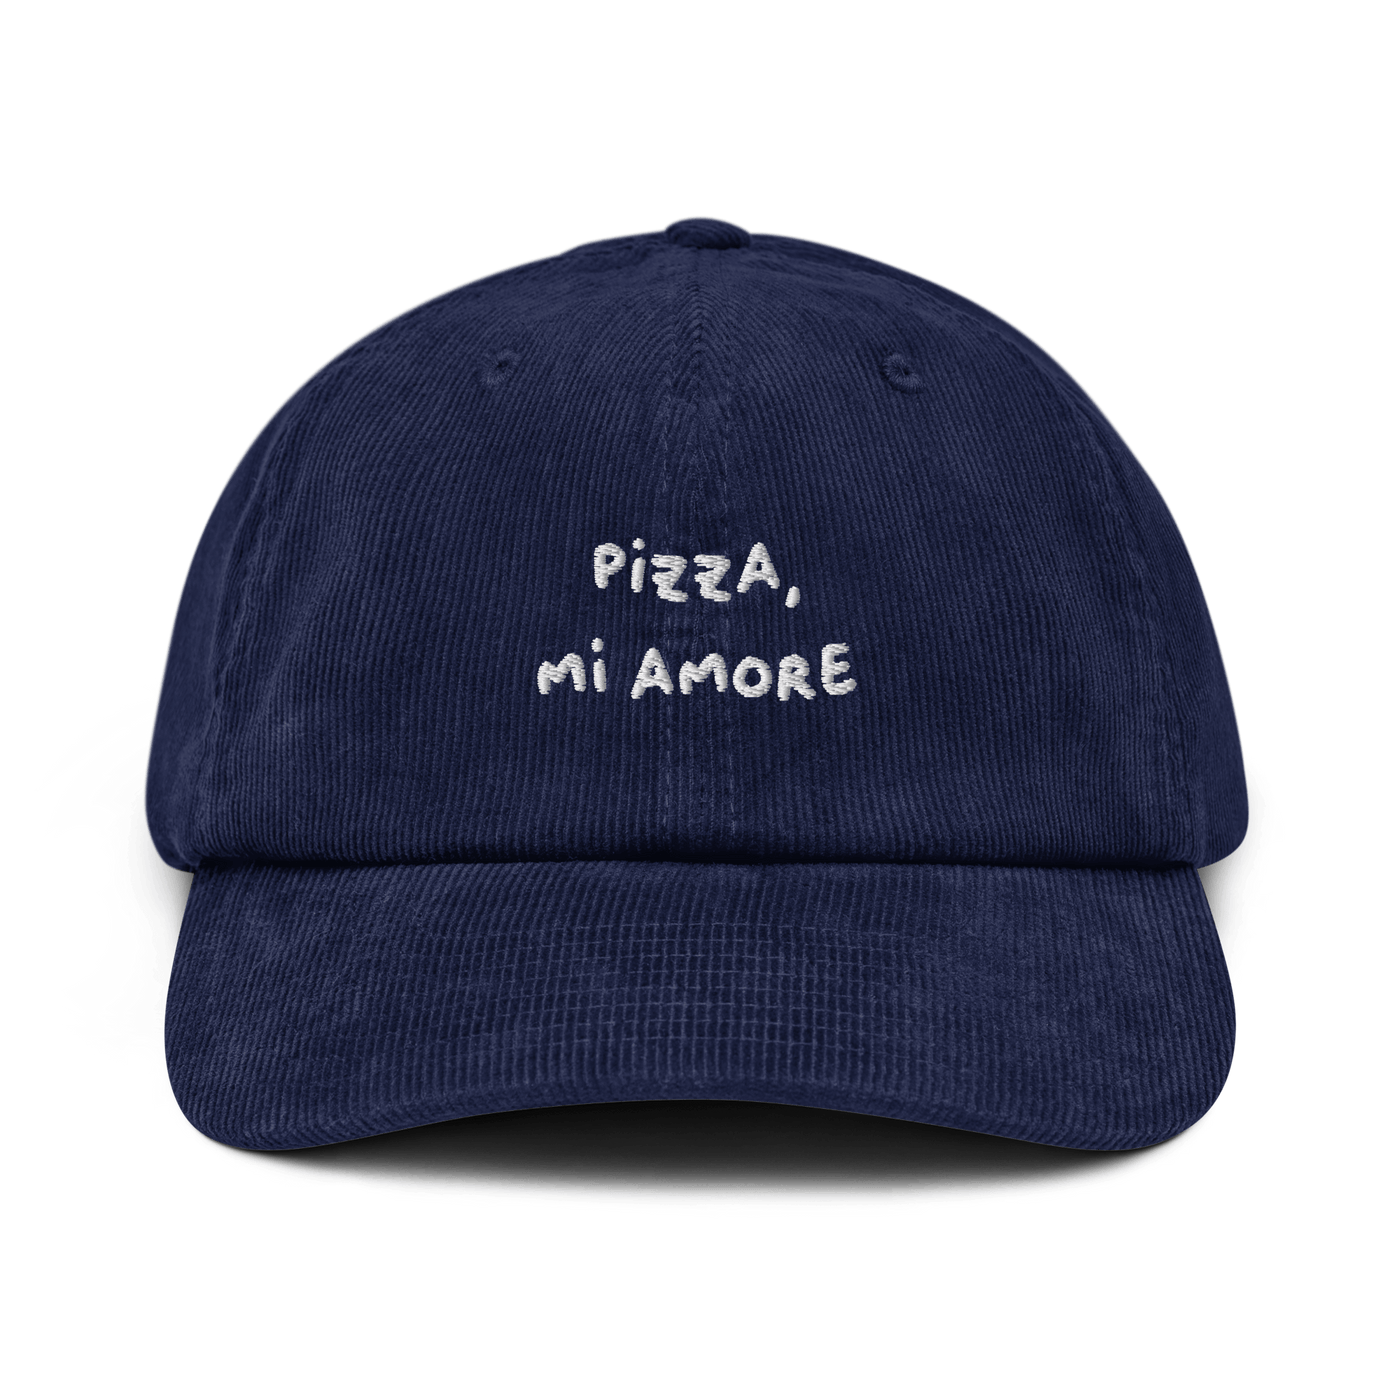 Pizza Mi Amore Corduroy hat - Oxford Navy - - Just Another Cap Store